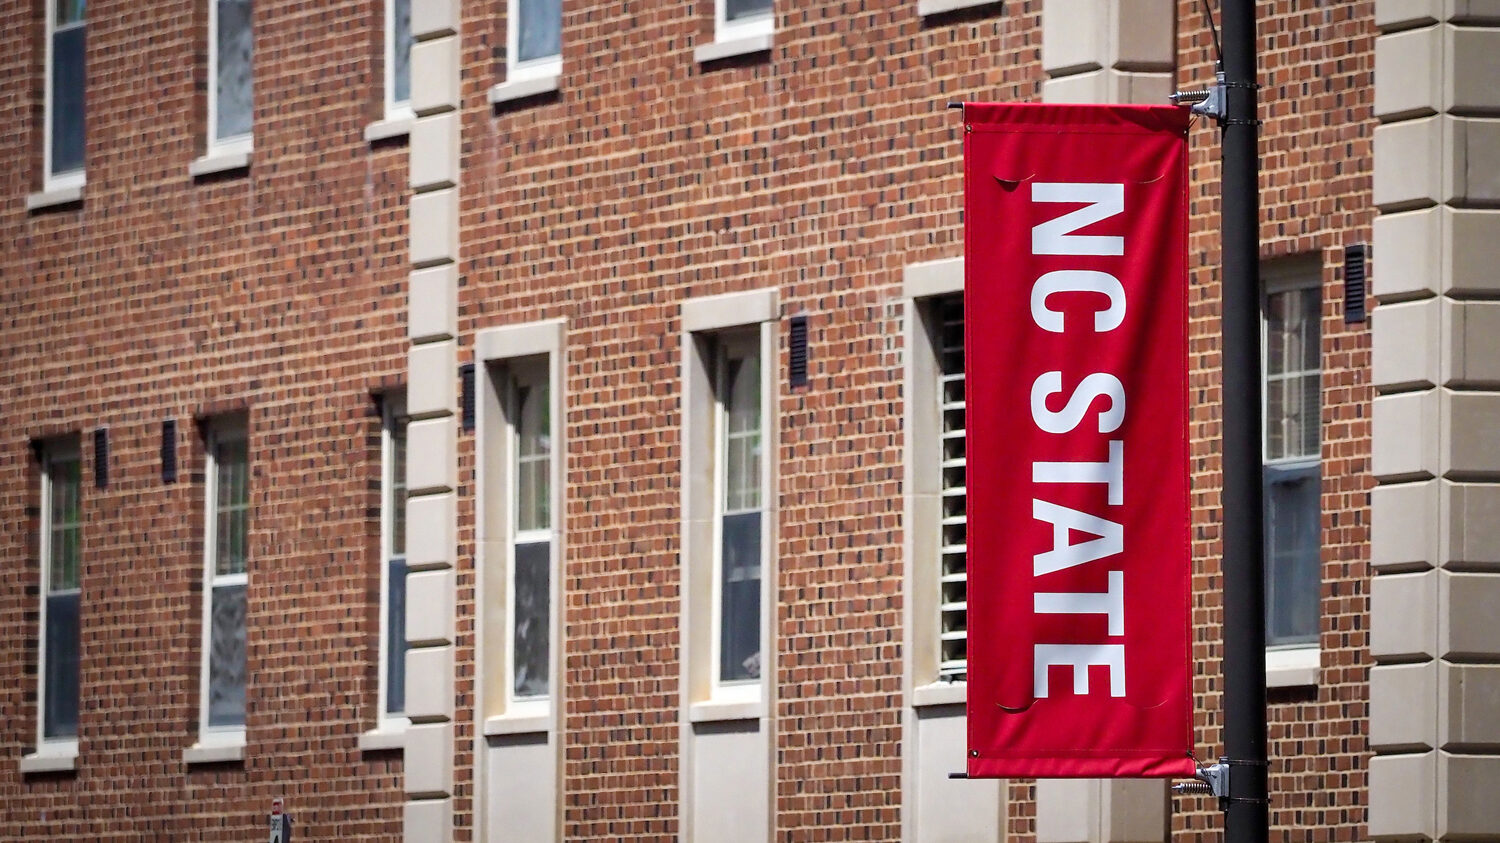 NC State Banner in Front of Tucker Residence Hall